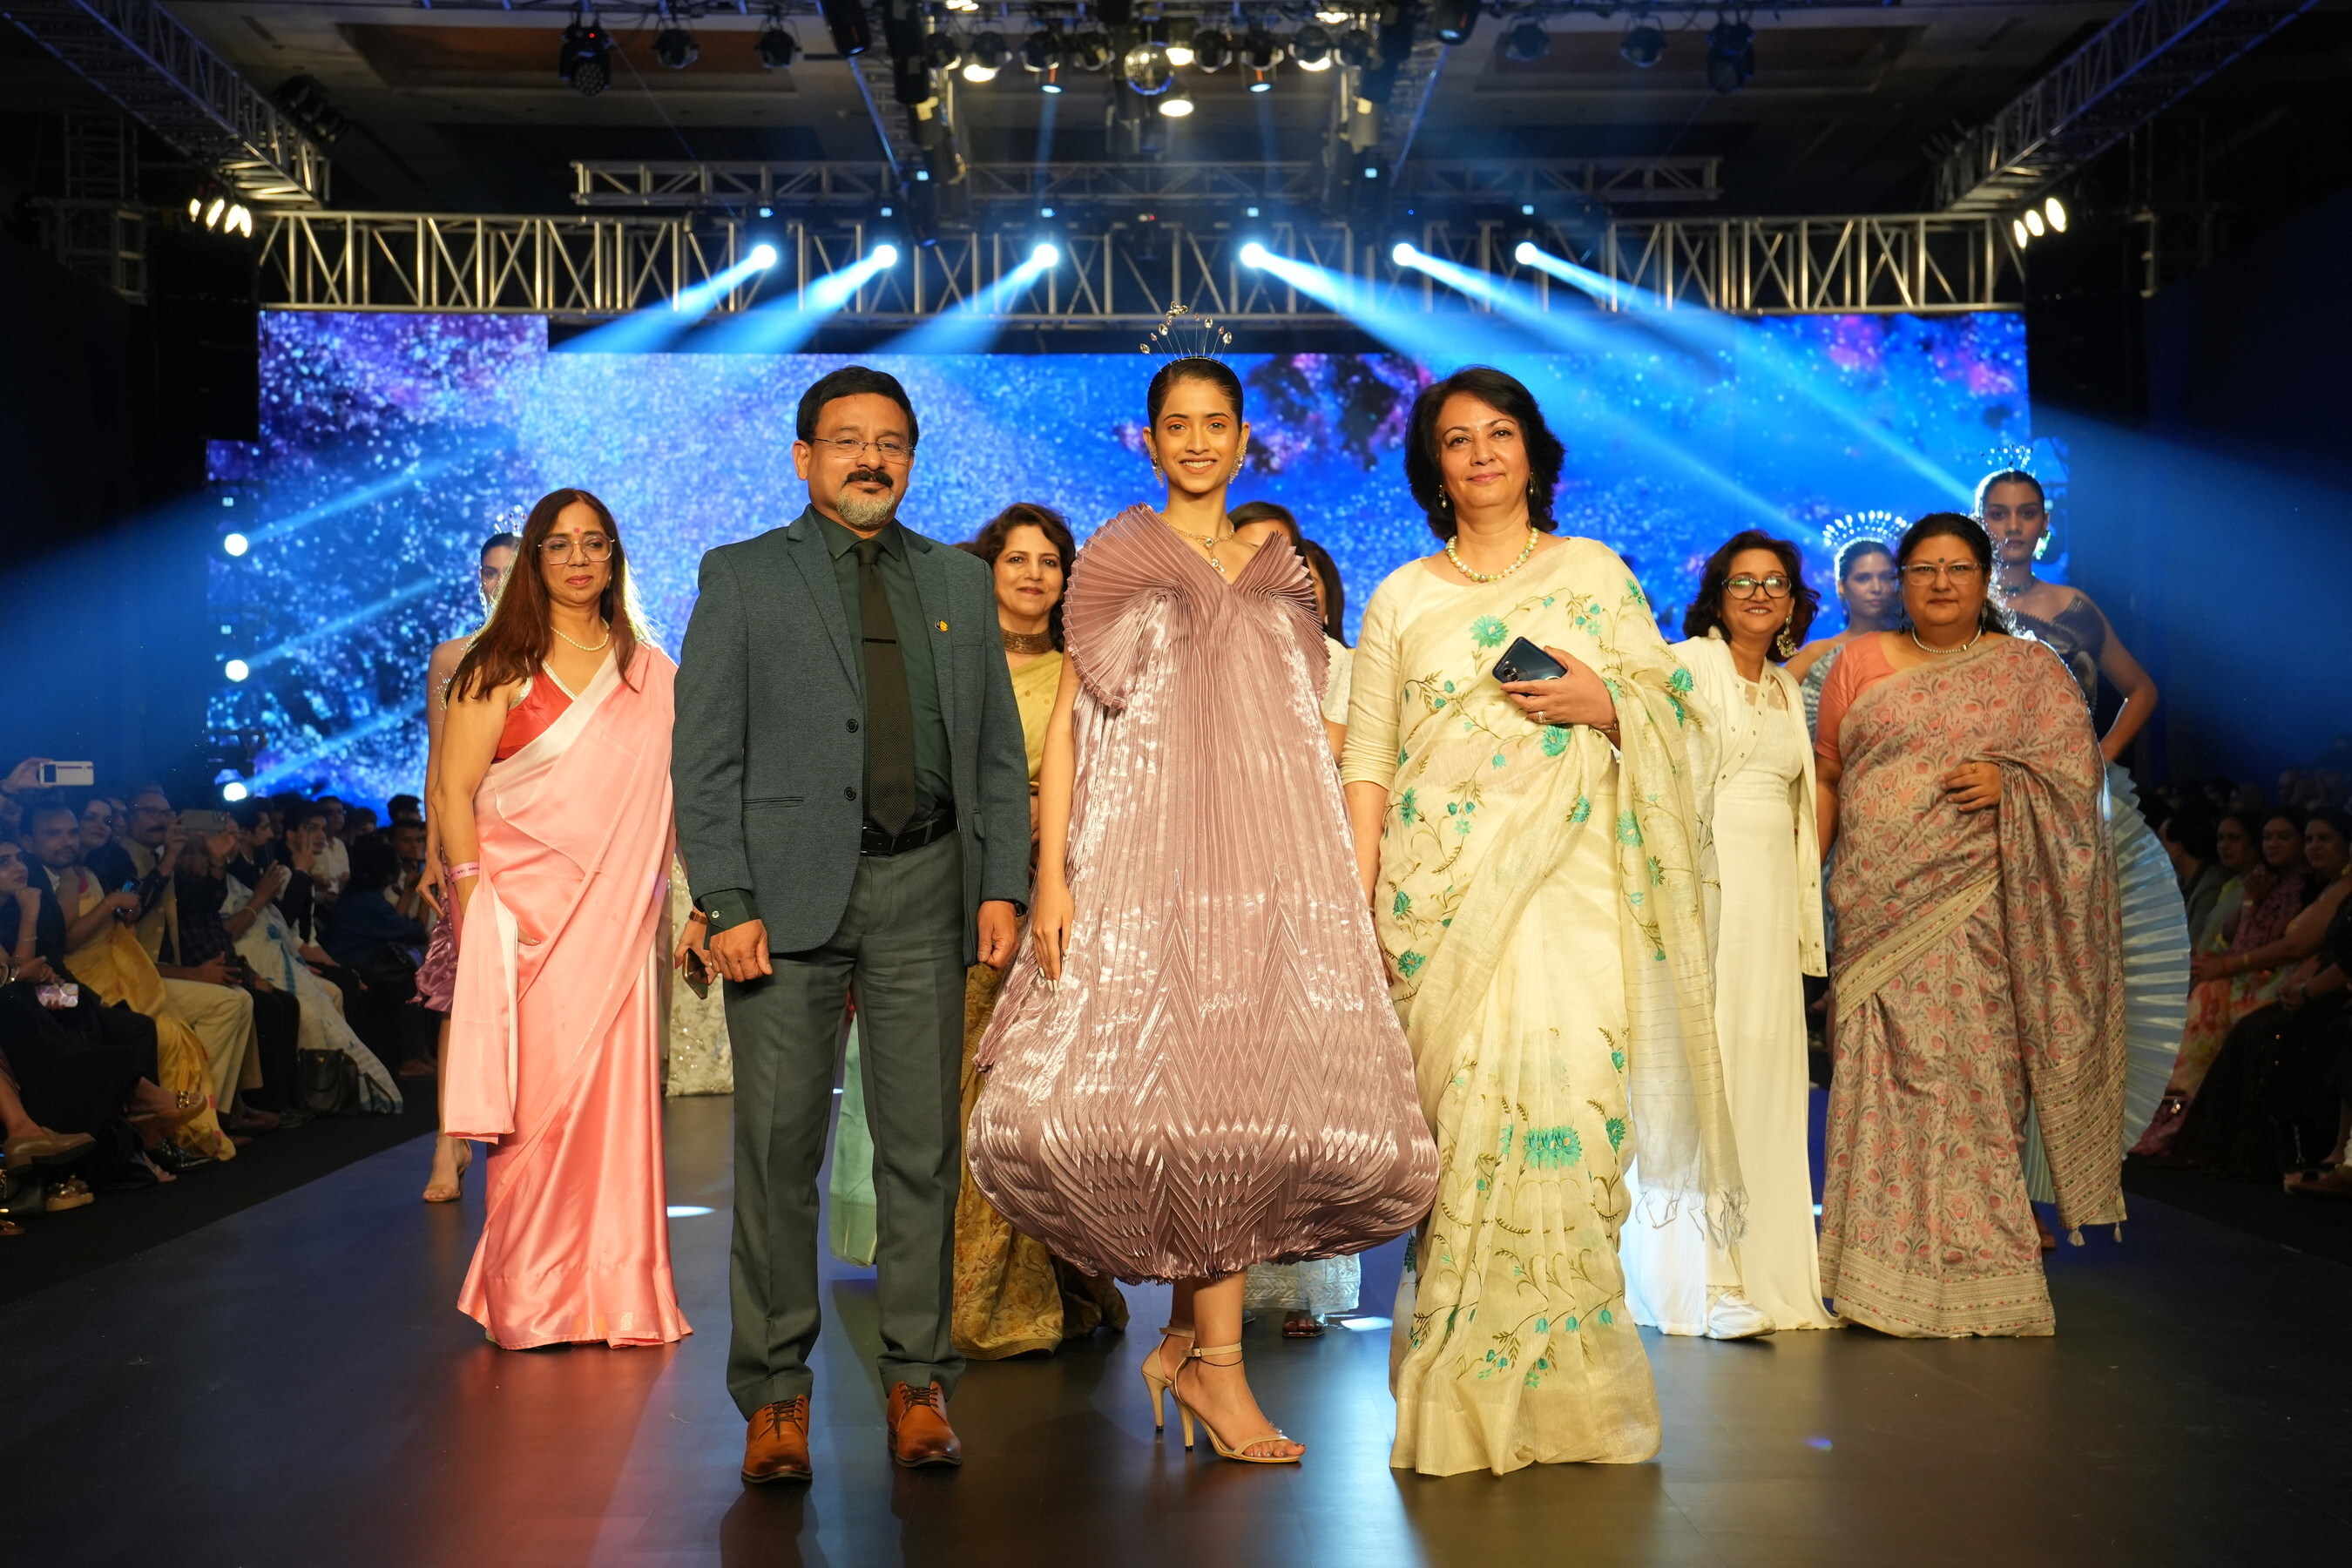 L to R: Prof. (Dr.) AW. Santhosh Kumar, Vice-Chancellor, Amity University Mumbai, Esha Velankar, showstopper and student Amity School of Fashion Technology (ASFT) and Prof. (Dr.) Bhawana Chanana, Head of Institution, Amity School of Fashion Technology, Amity University Mumbai, walk the ramp at the Bombay Times Fashion Week 2024, during the finale of the display of the students’ spectacular collect